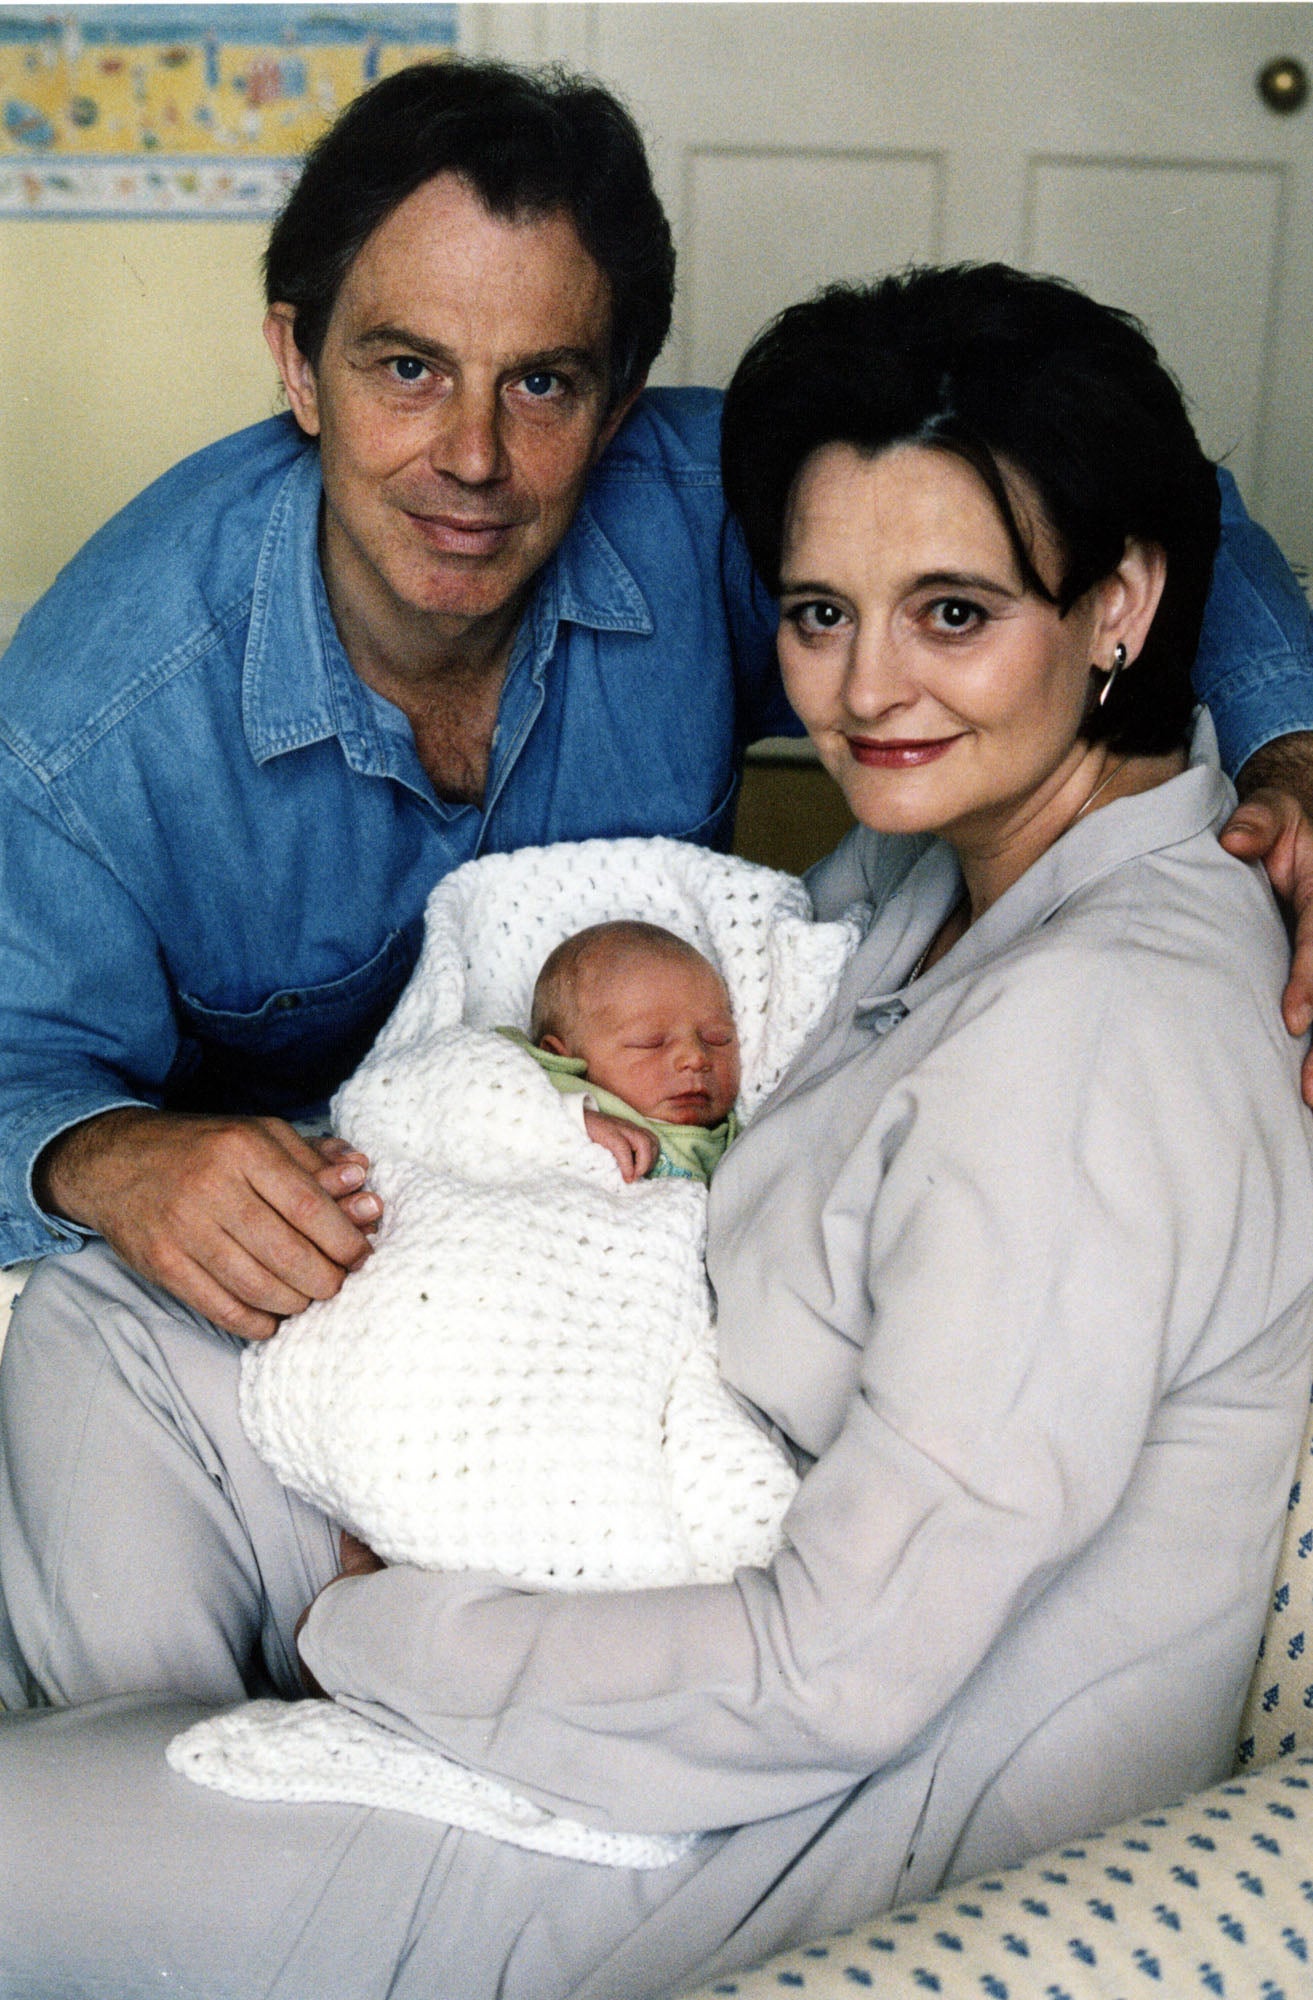 Tony and Cherie Blair with son Leo at 10 Downing Street on 21 May 2000